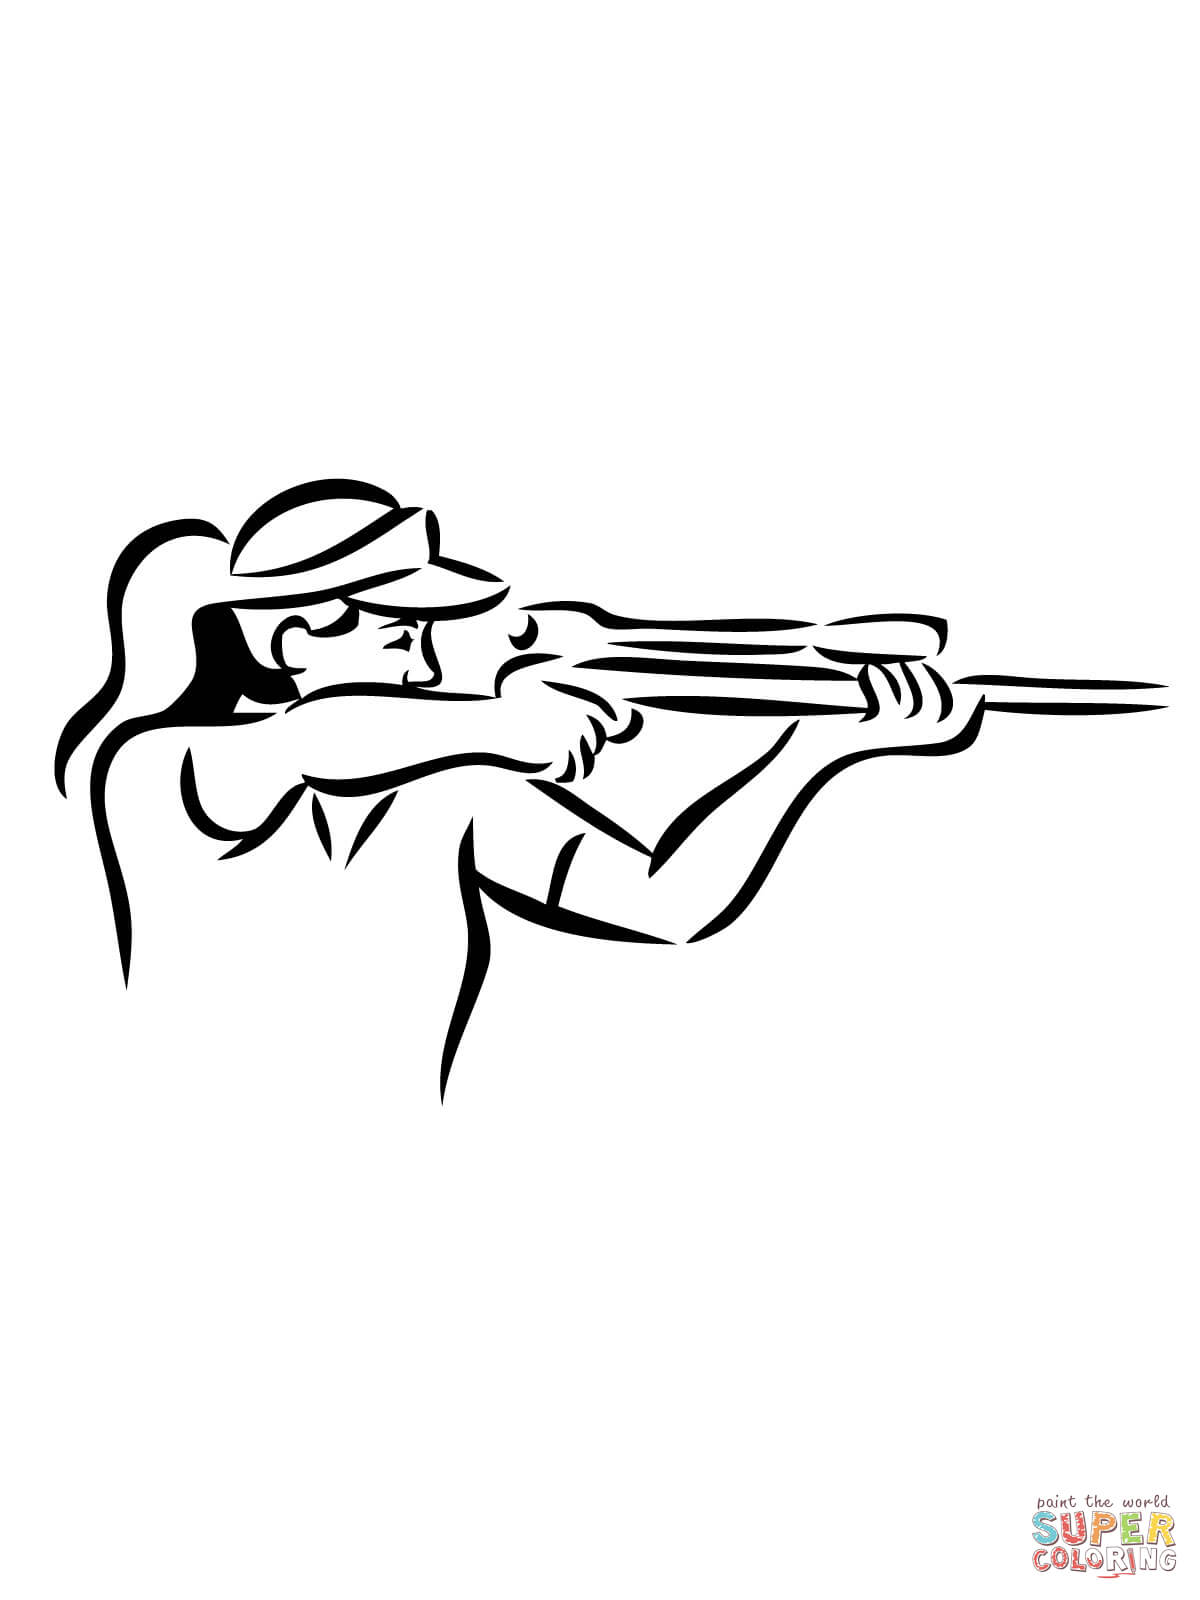 Shooting Sniper Rifle coloring page | Free Printable Coloring Pages